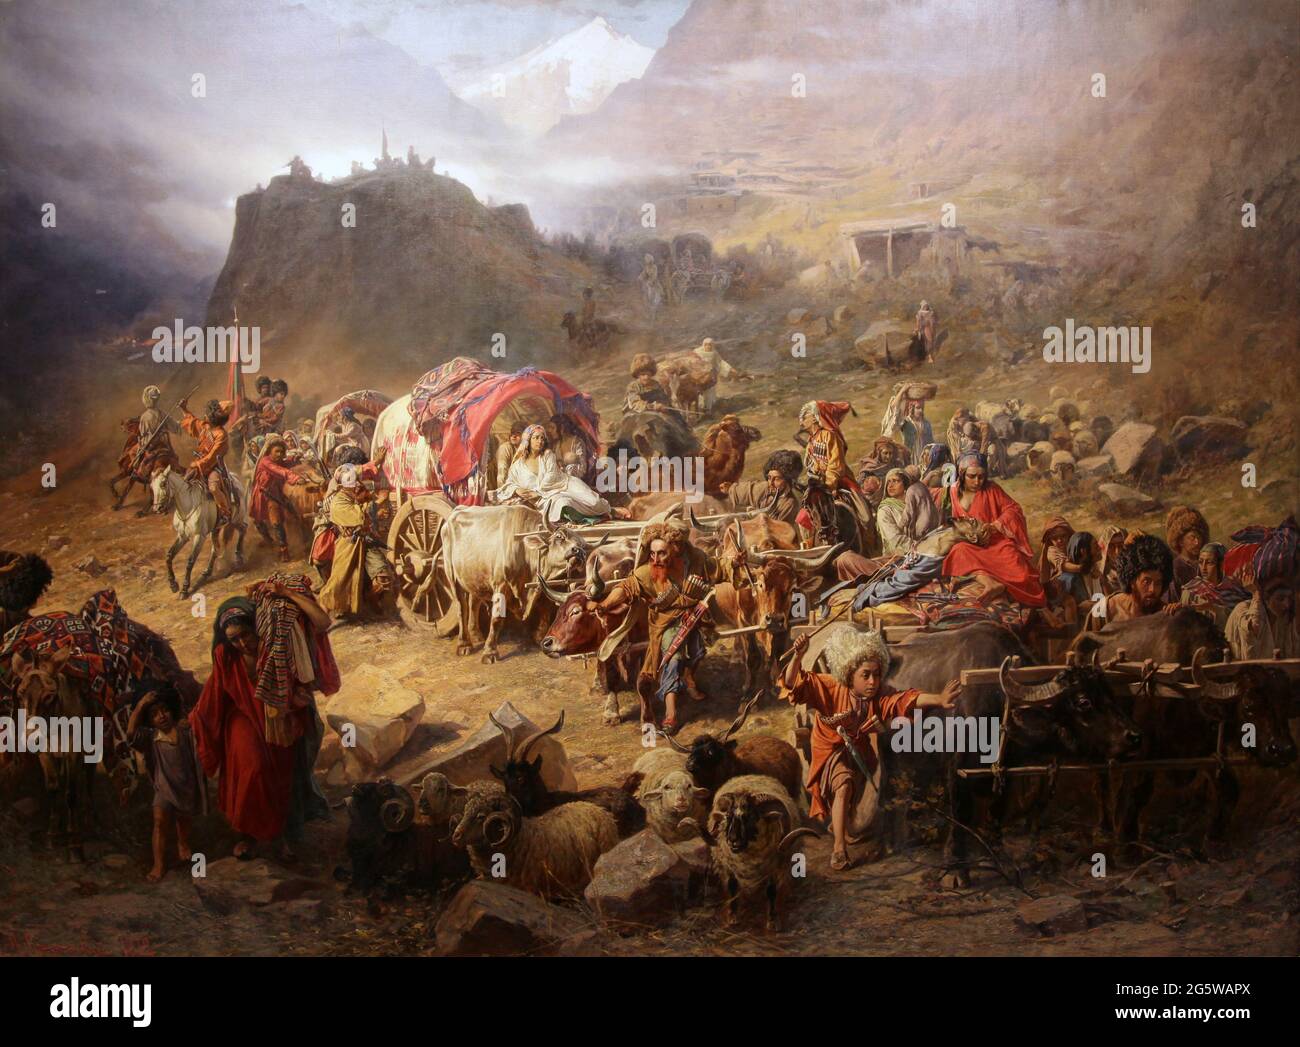 Mountaineers Leaving the Aul at the Approach of Russian Troops 1872 a painting by russian artist Pyotr Gruzinsky 1837-1892.(Georgian royal prince  from the House of Mukhrani of the royal Bagrationi dynasty.) Stock Photo